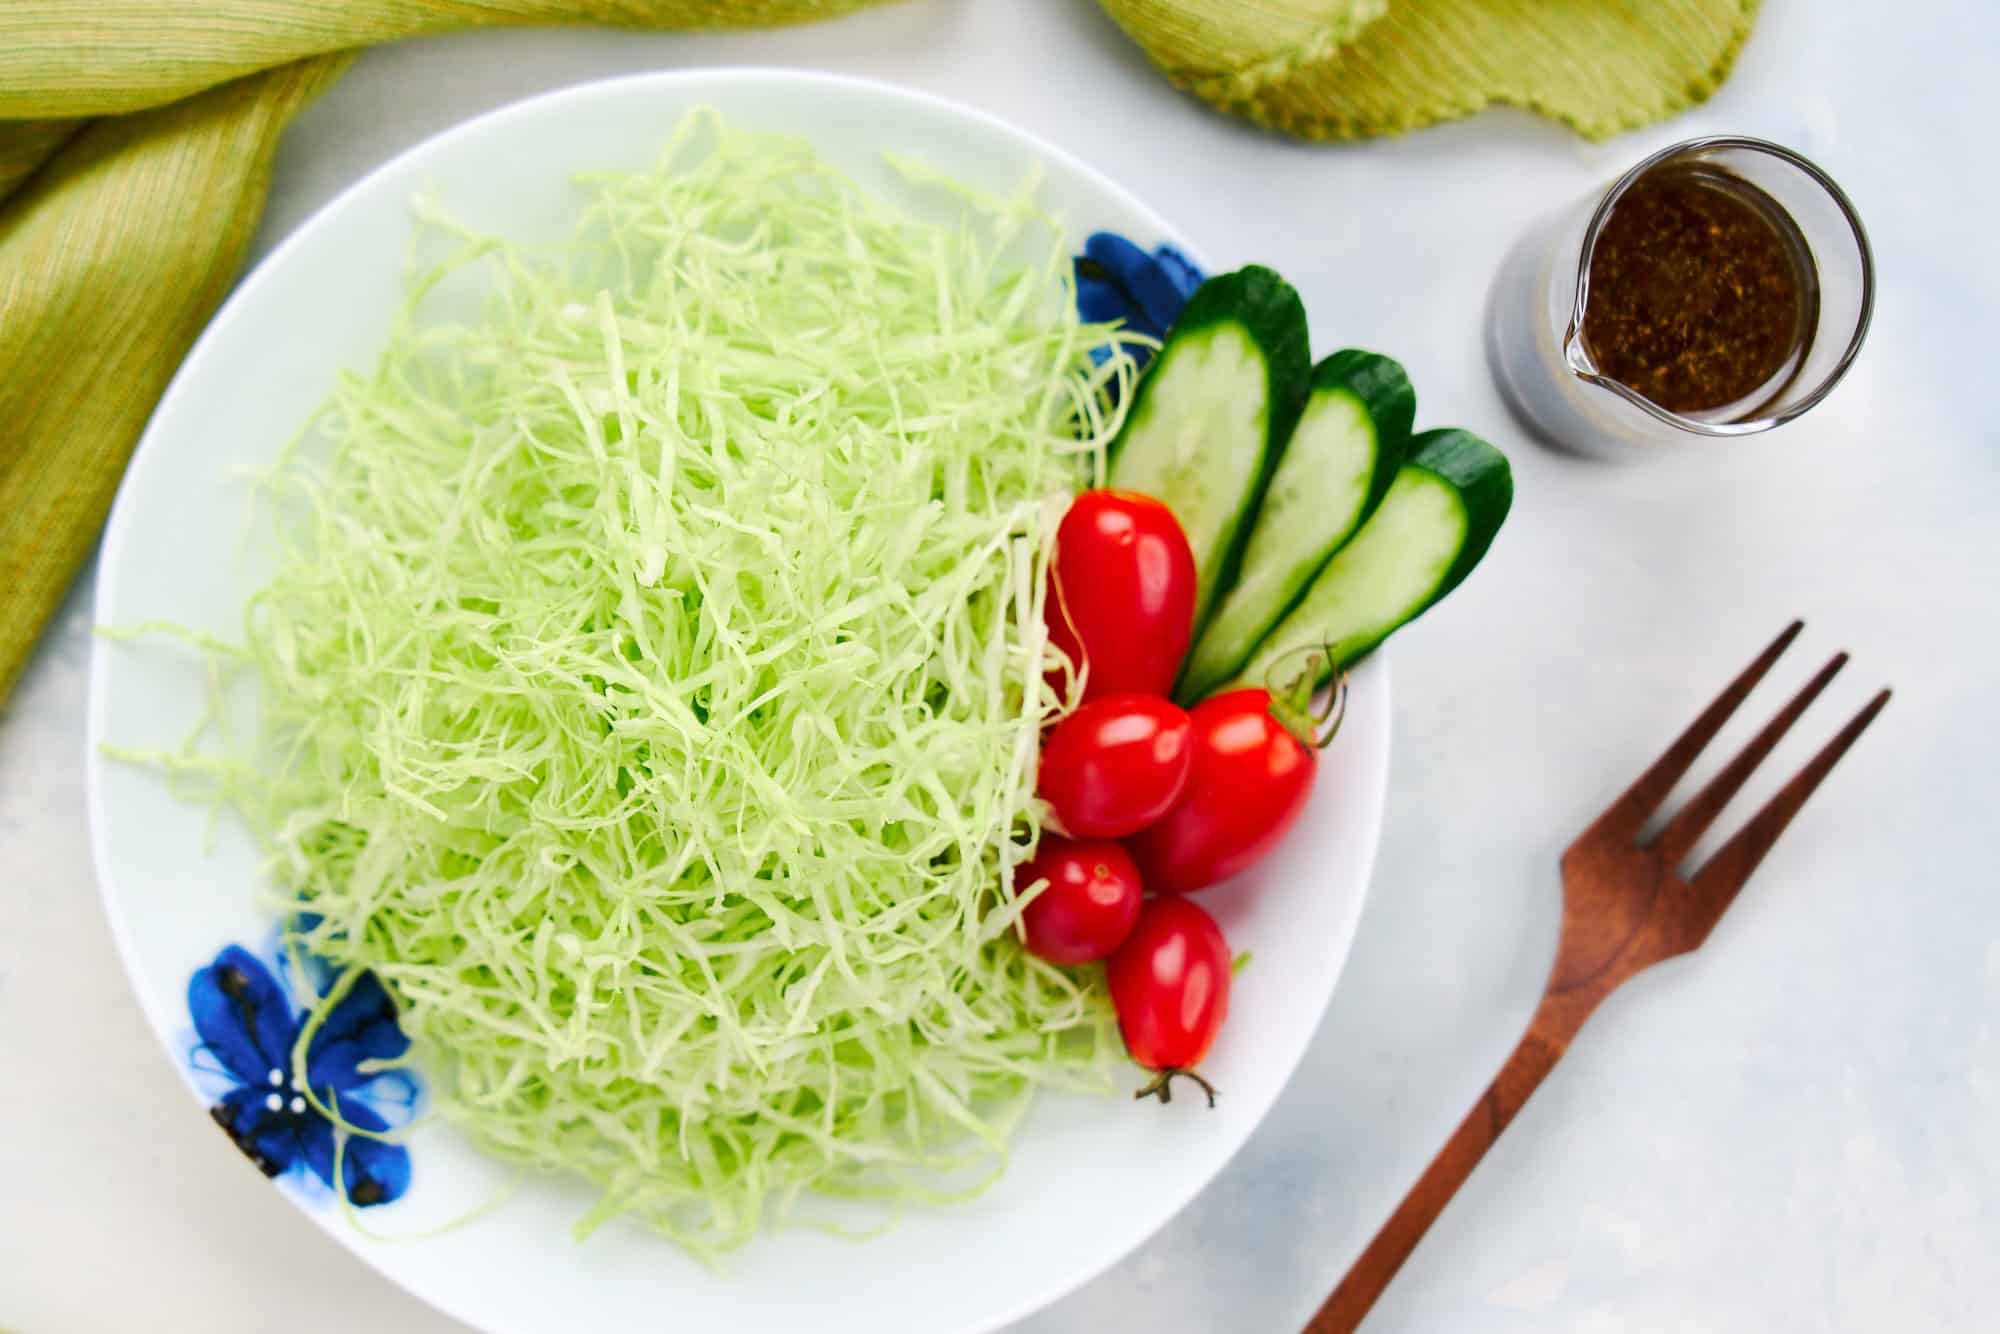 Overhead view of thinly shredded Japanese cabbage salad with cherry tomatoes, cucumber, and dressing.